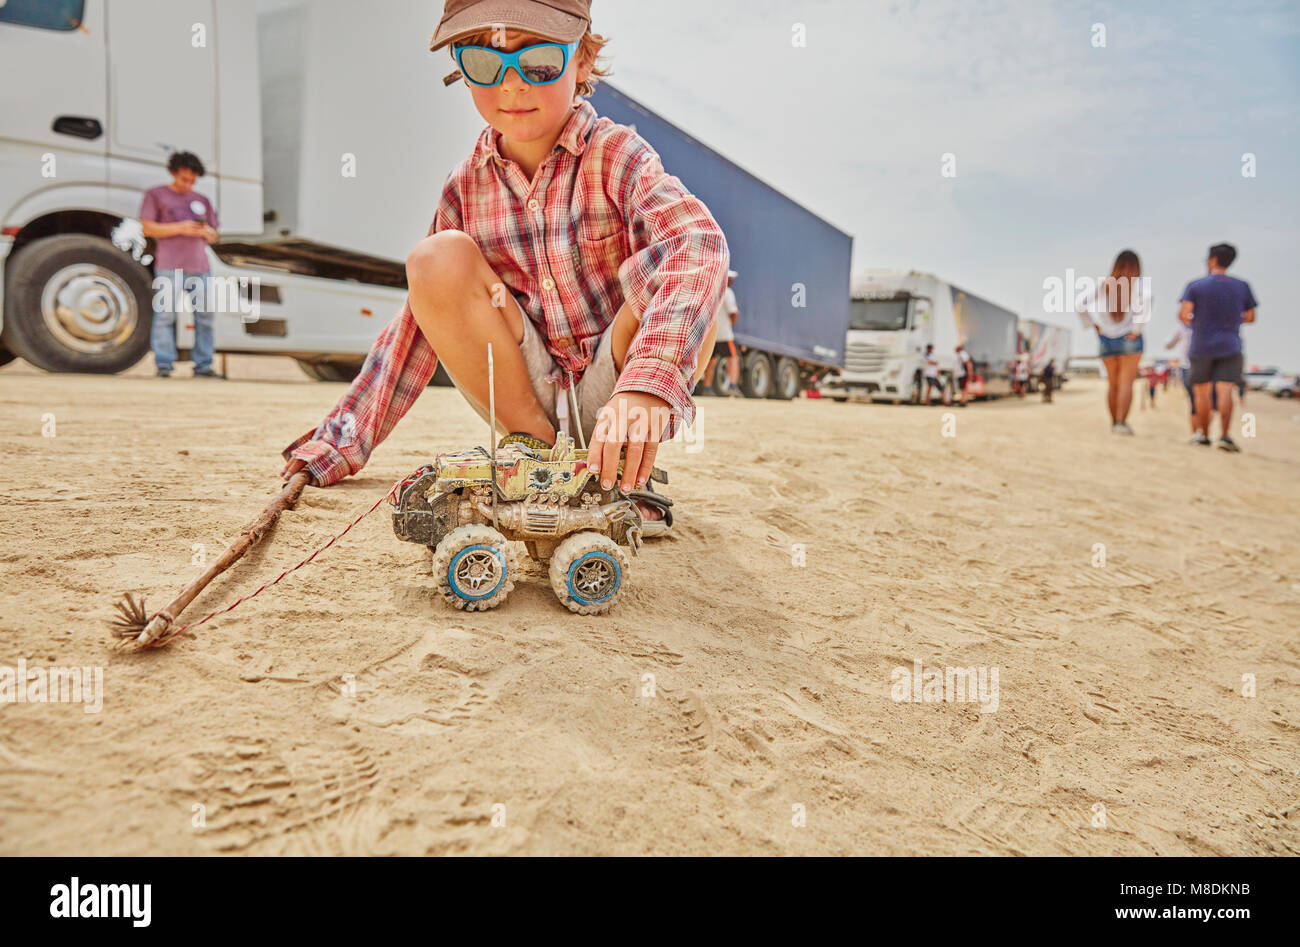 Boy playing with toy truck in sand, Ica, Peru Stock Photo